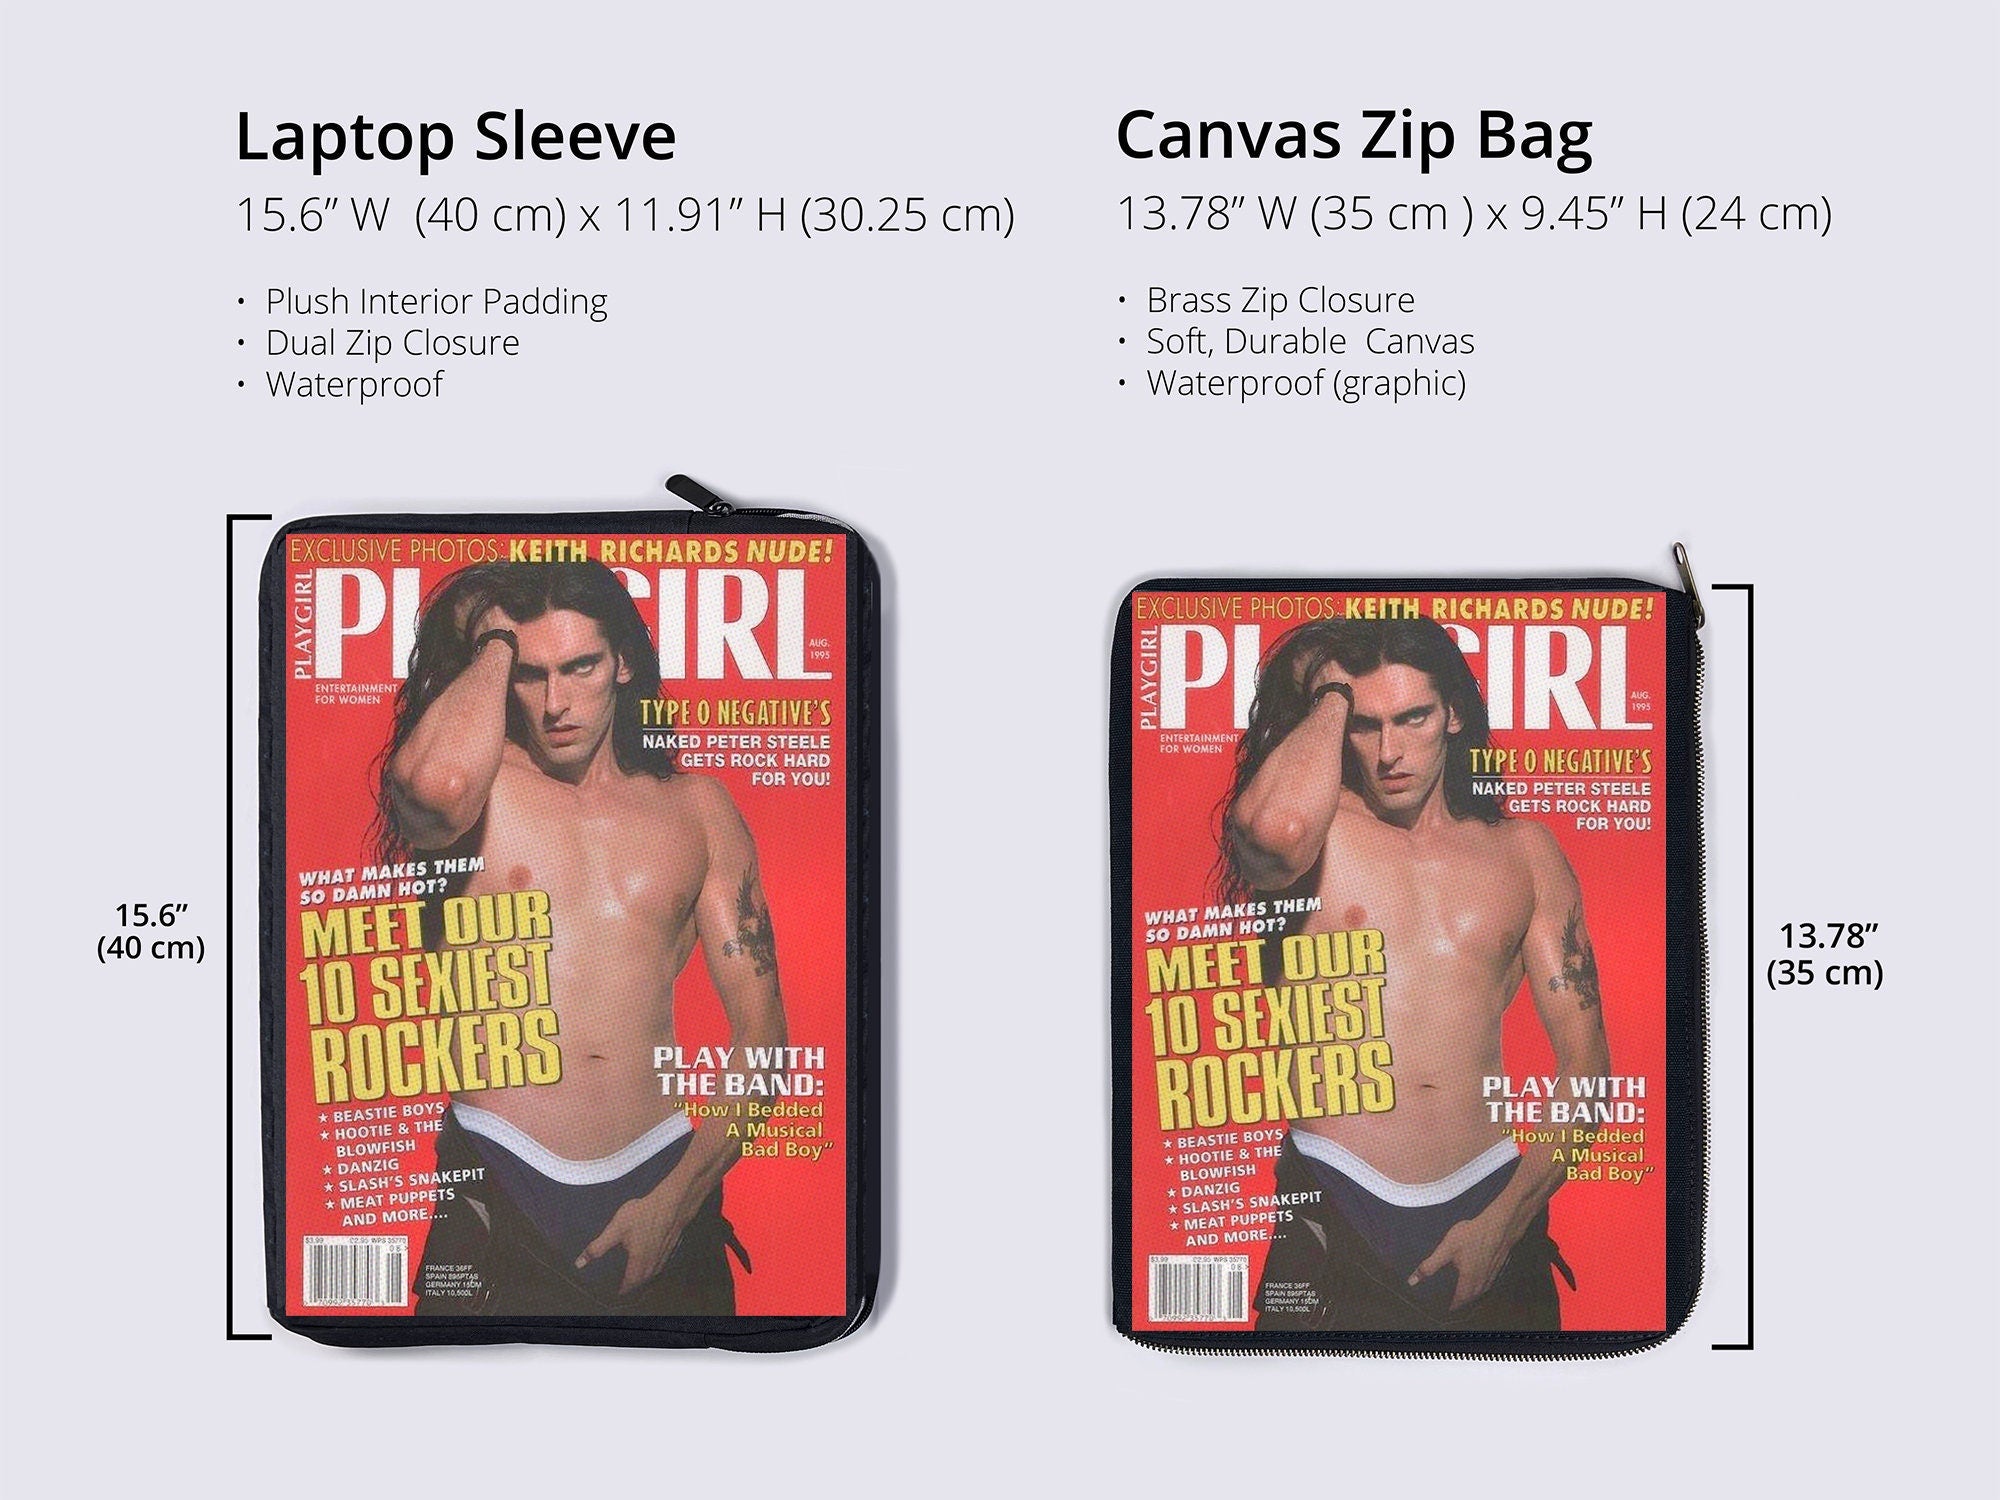 Coated Canvas Zip Bag Playgirl Peter Steele Type 0 Negative Issue Digitized Art for iPad, Laptop, Tablet Unique Gifts Multi-Use Travel Bag